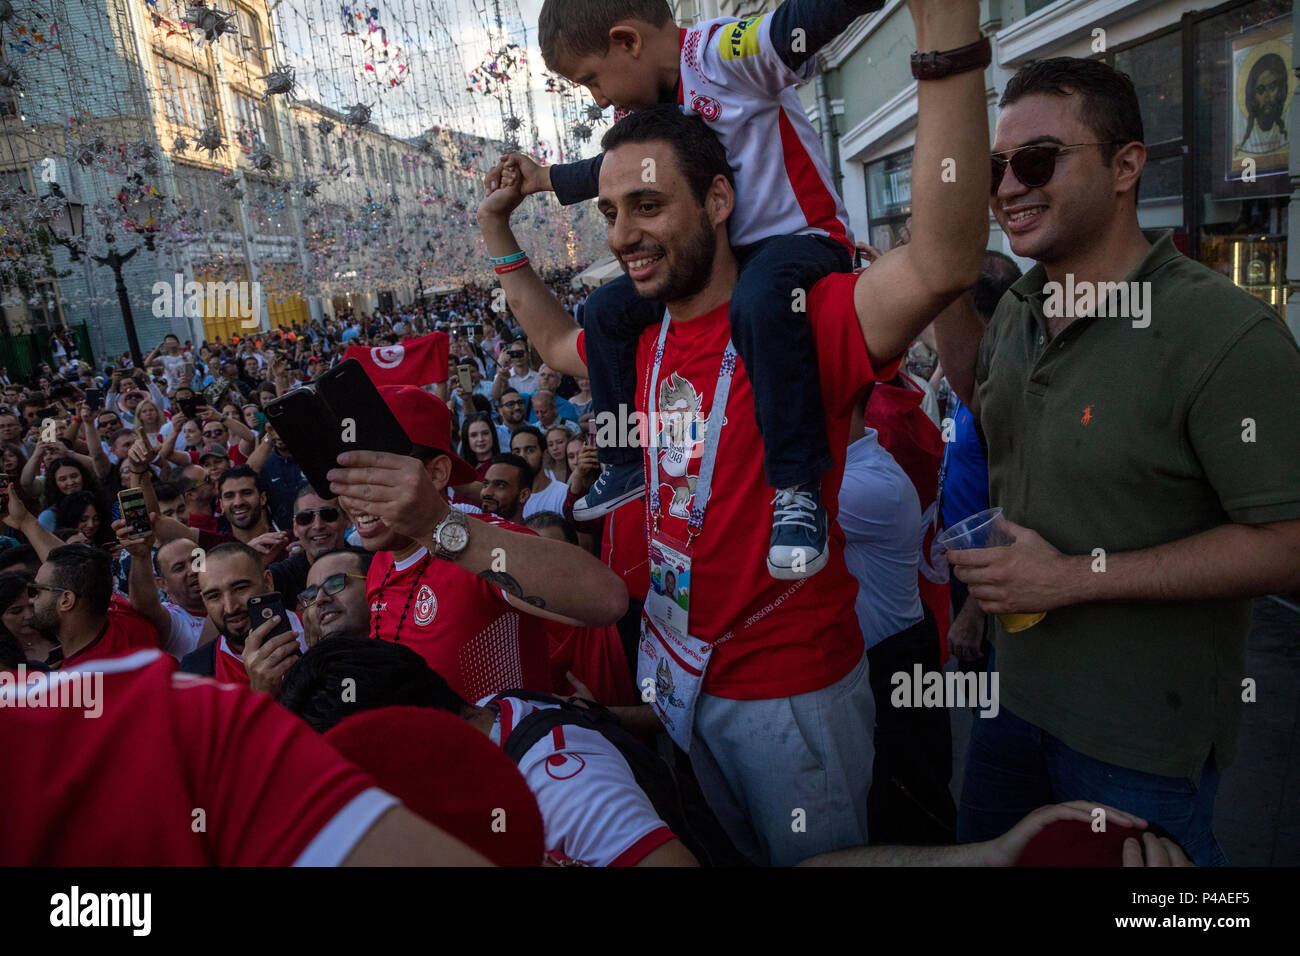 Moscow, Russia. 21st June, 2018. Tunisian football fans sing and cheer on Nikolskaya street during The World Cup Tournament in Moscow, Russia Stock Photo